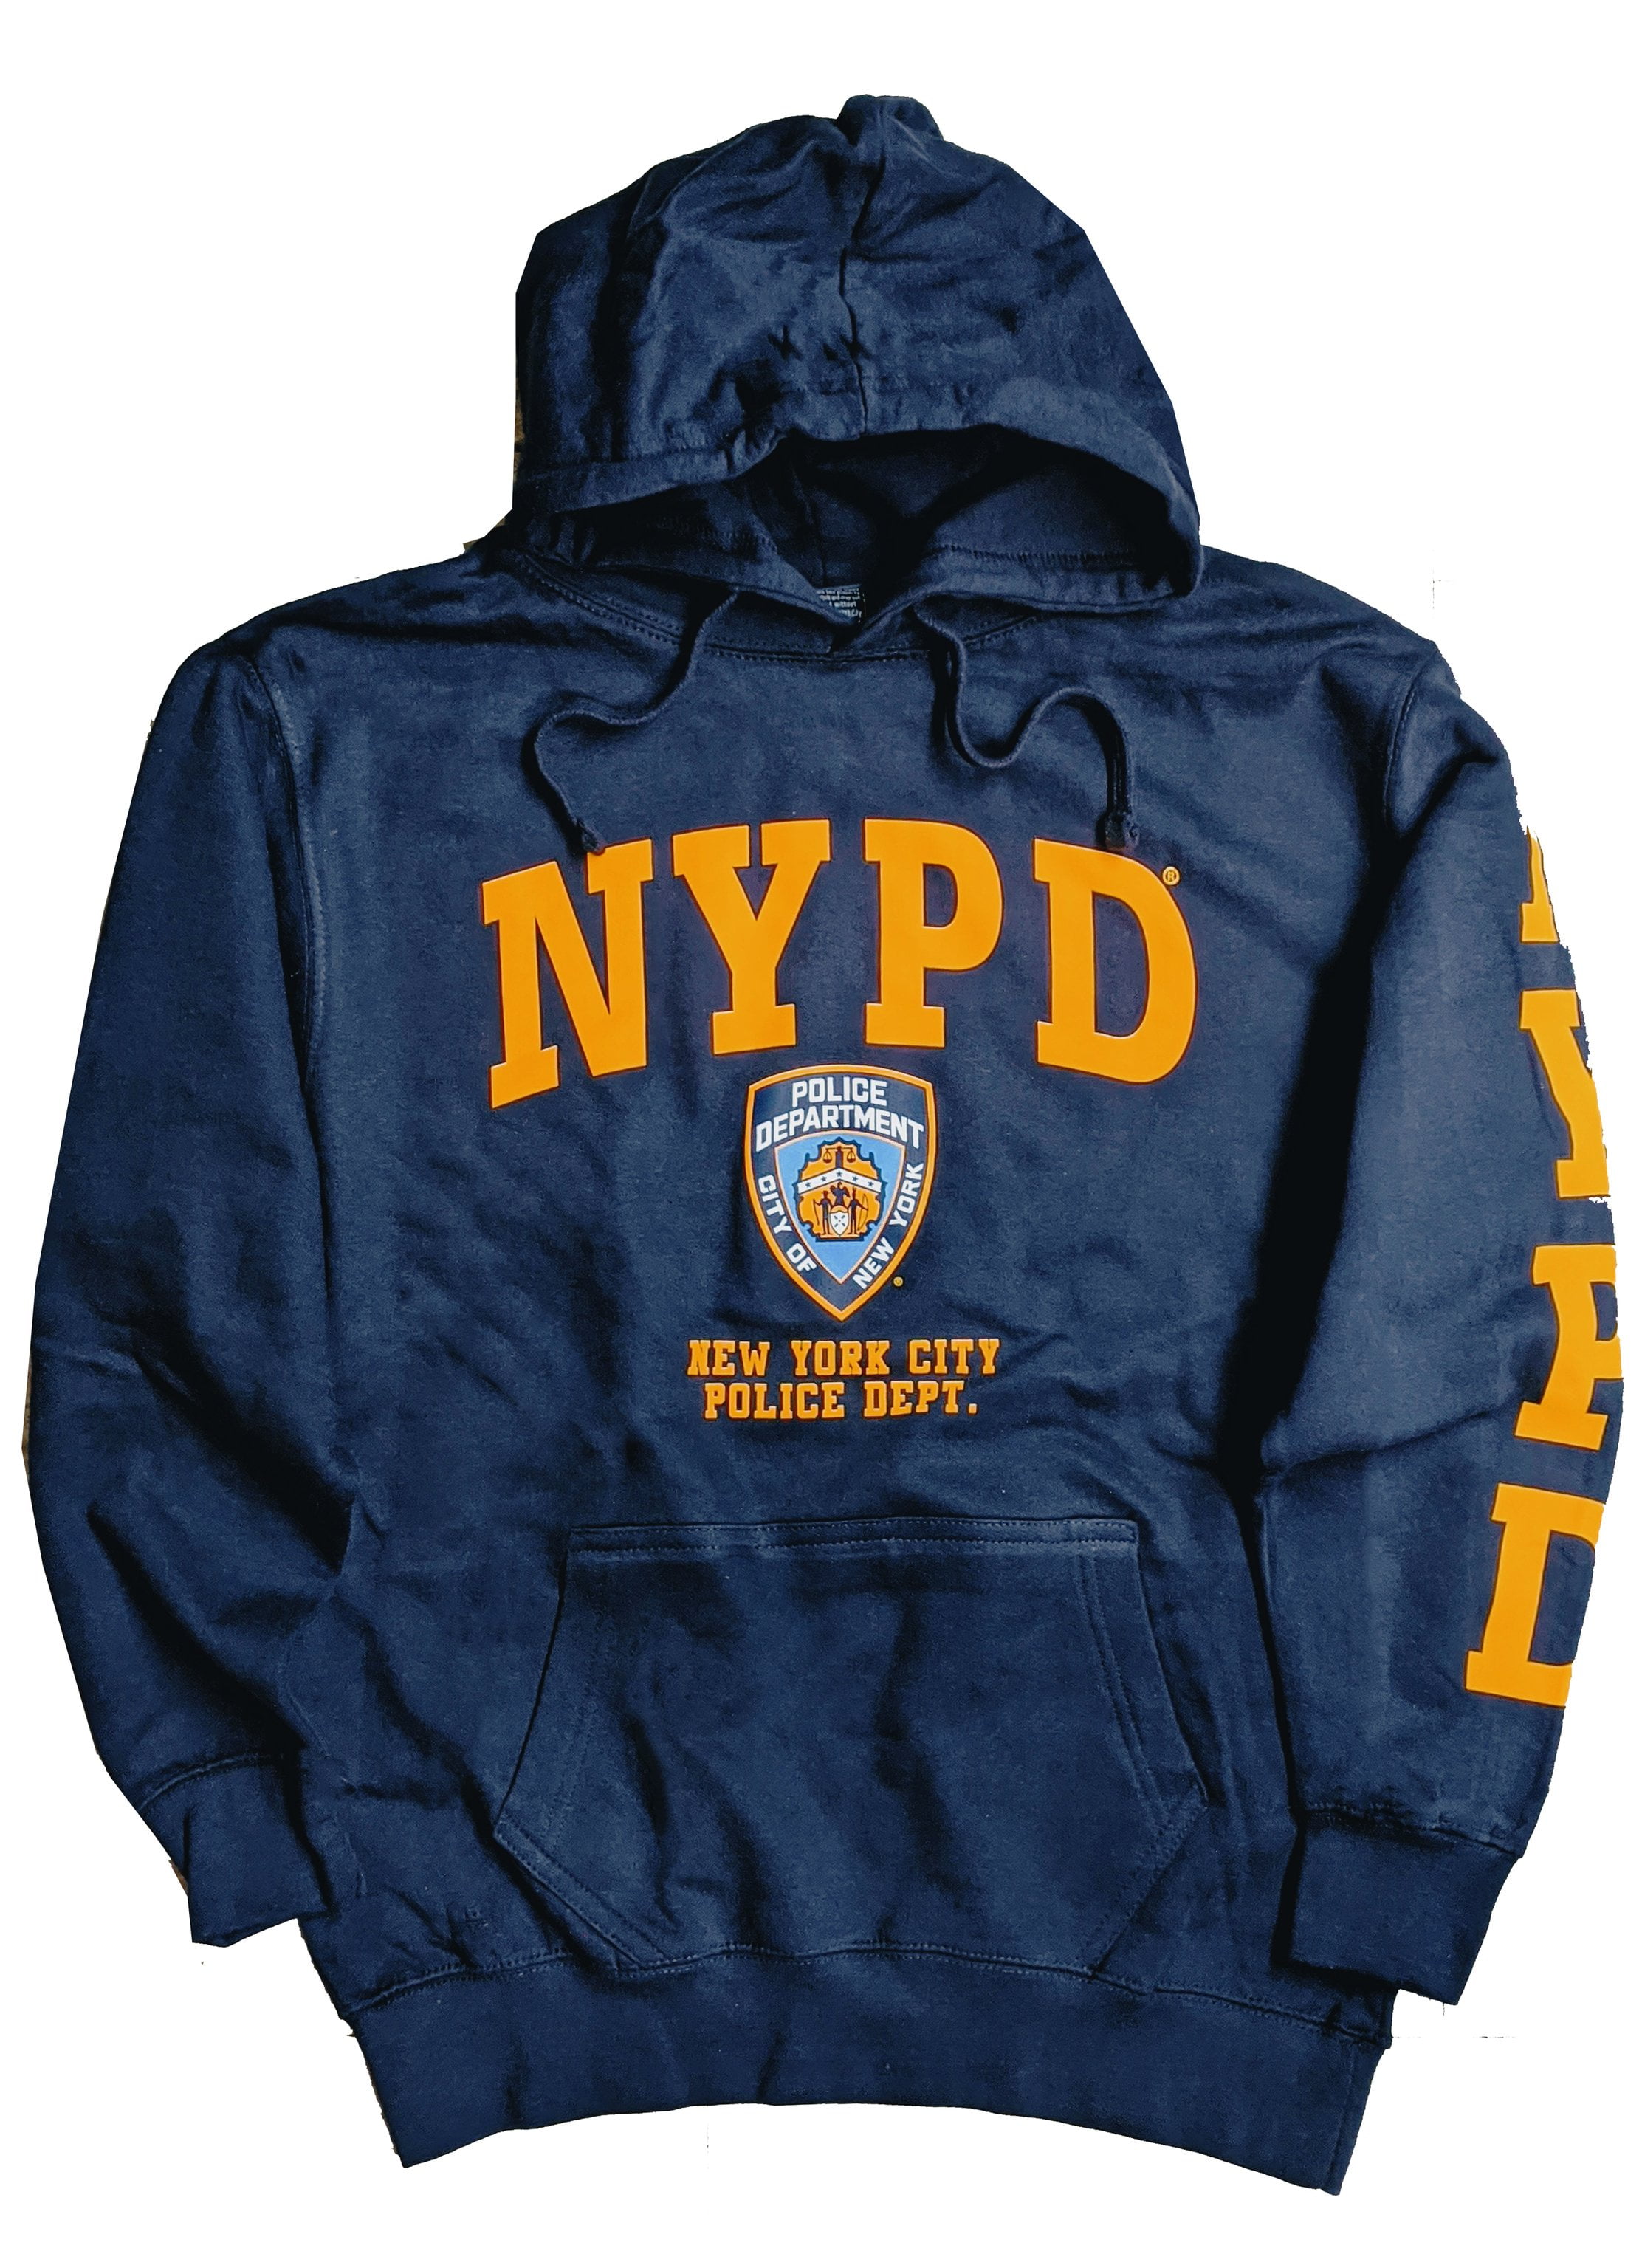 NYPD Full Chest Navy Hooded Sweatshirt Adult X-Large 